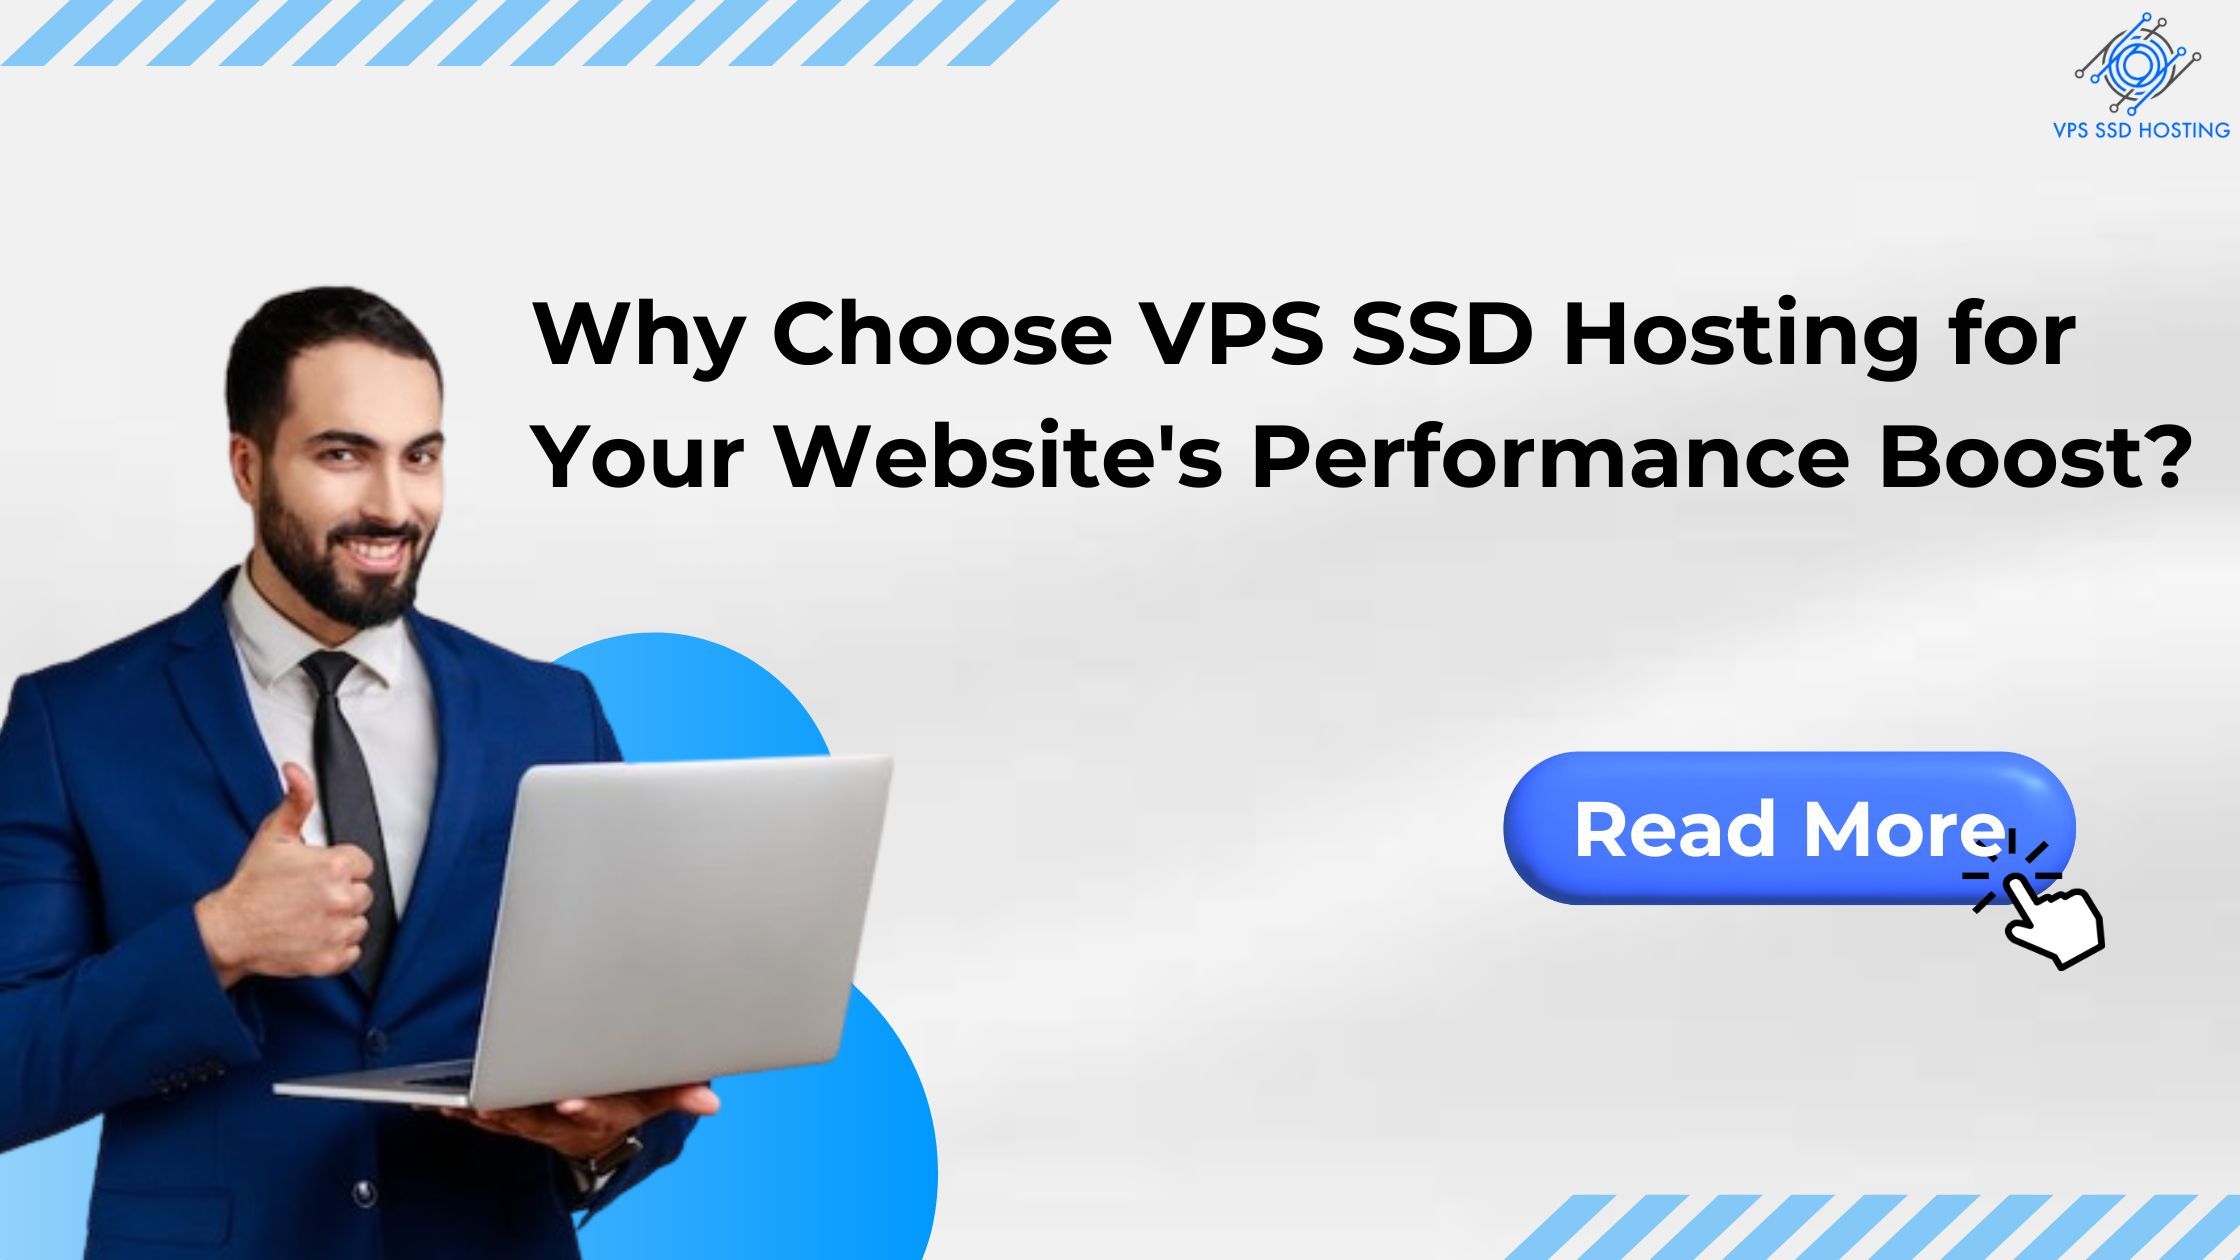 Why Choose VPS SSD Hosting for Your Website's Performance Boost